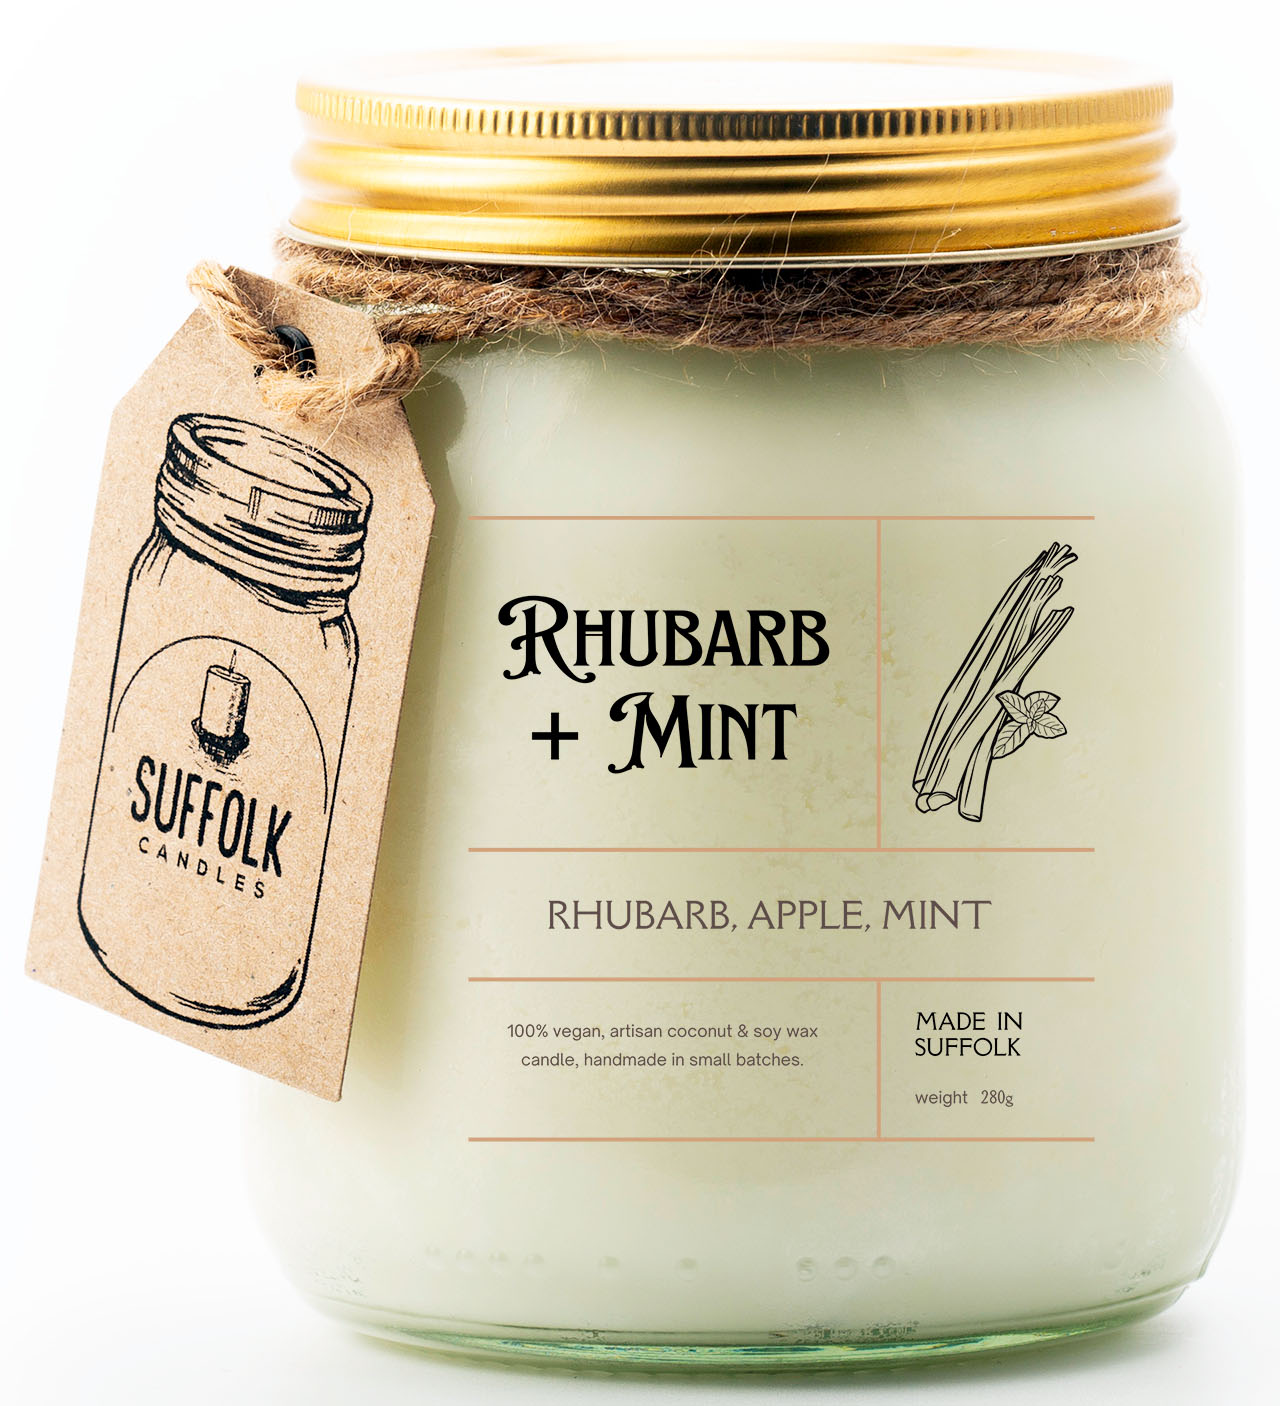 Rhubarb & Mint Candle, Crisp Scent of Rhubarb, Pear and Lush Garden Mint